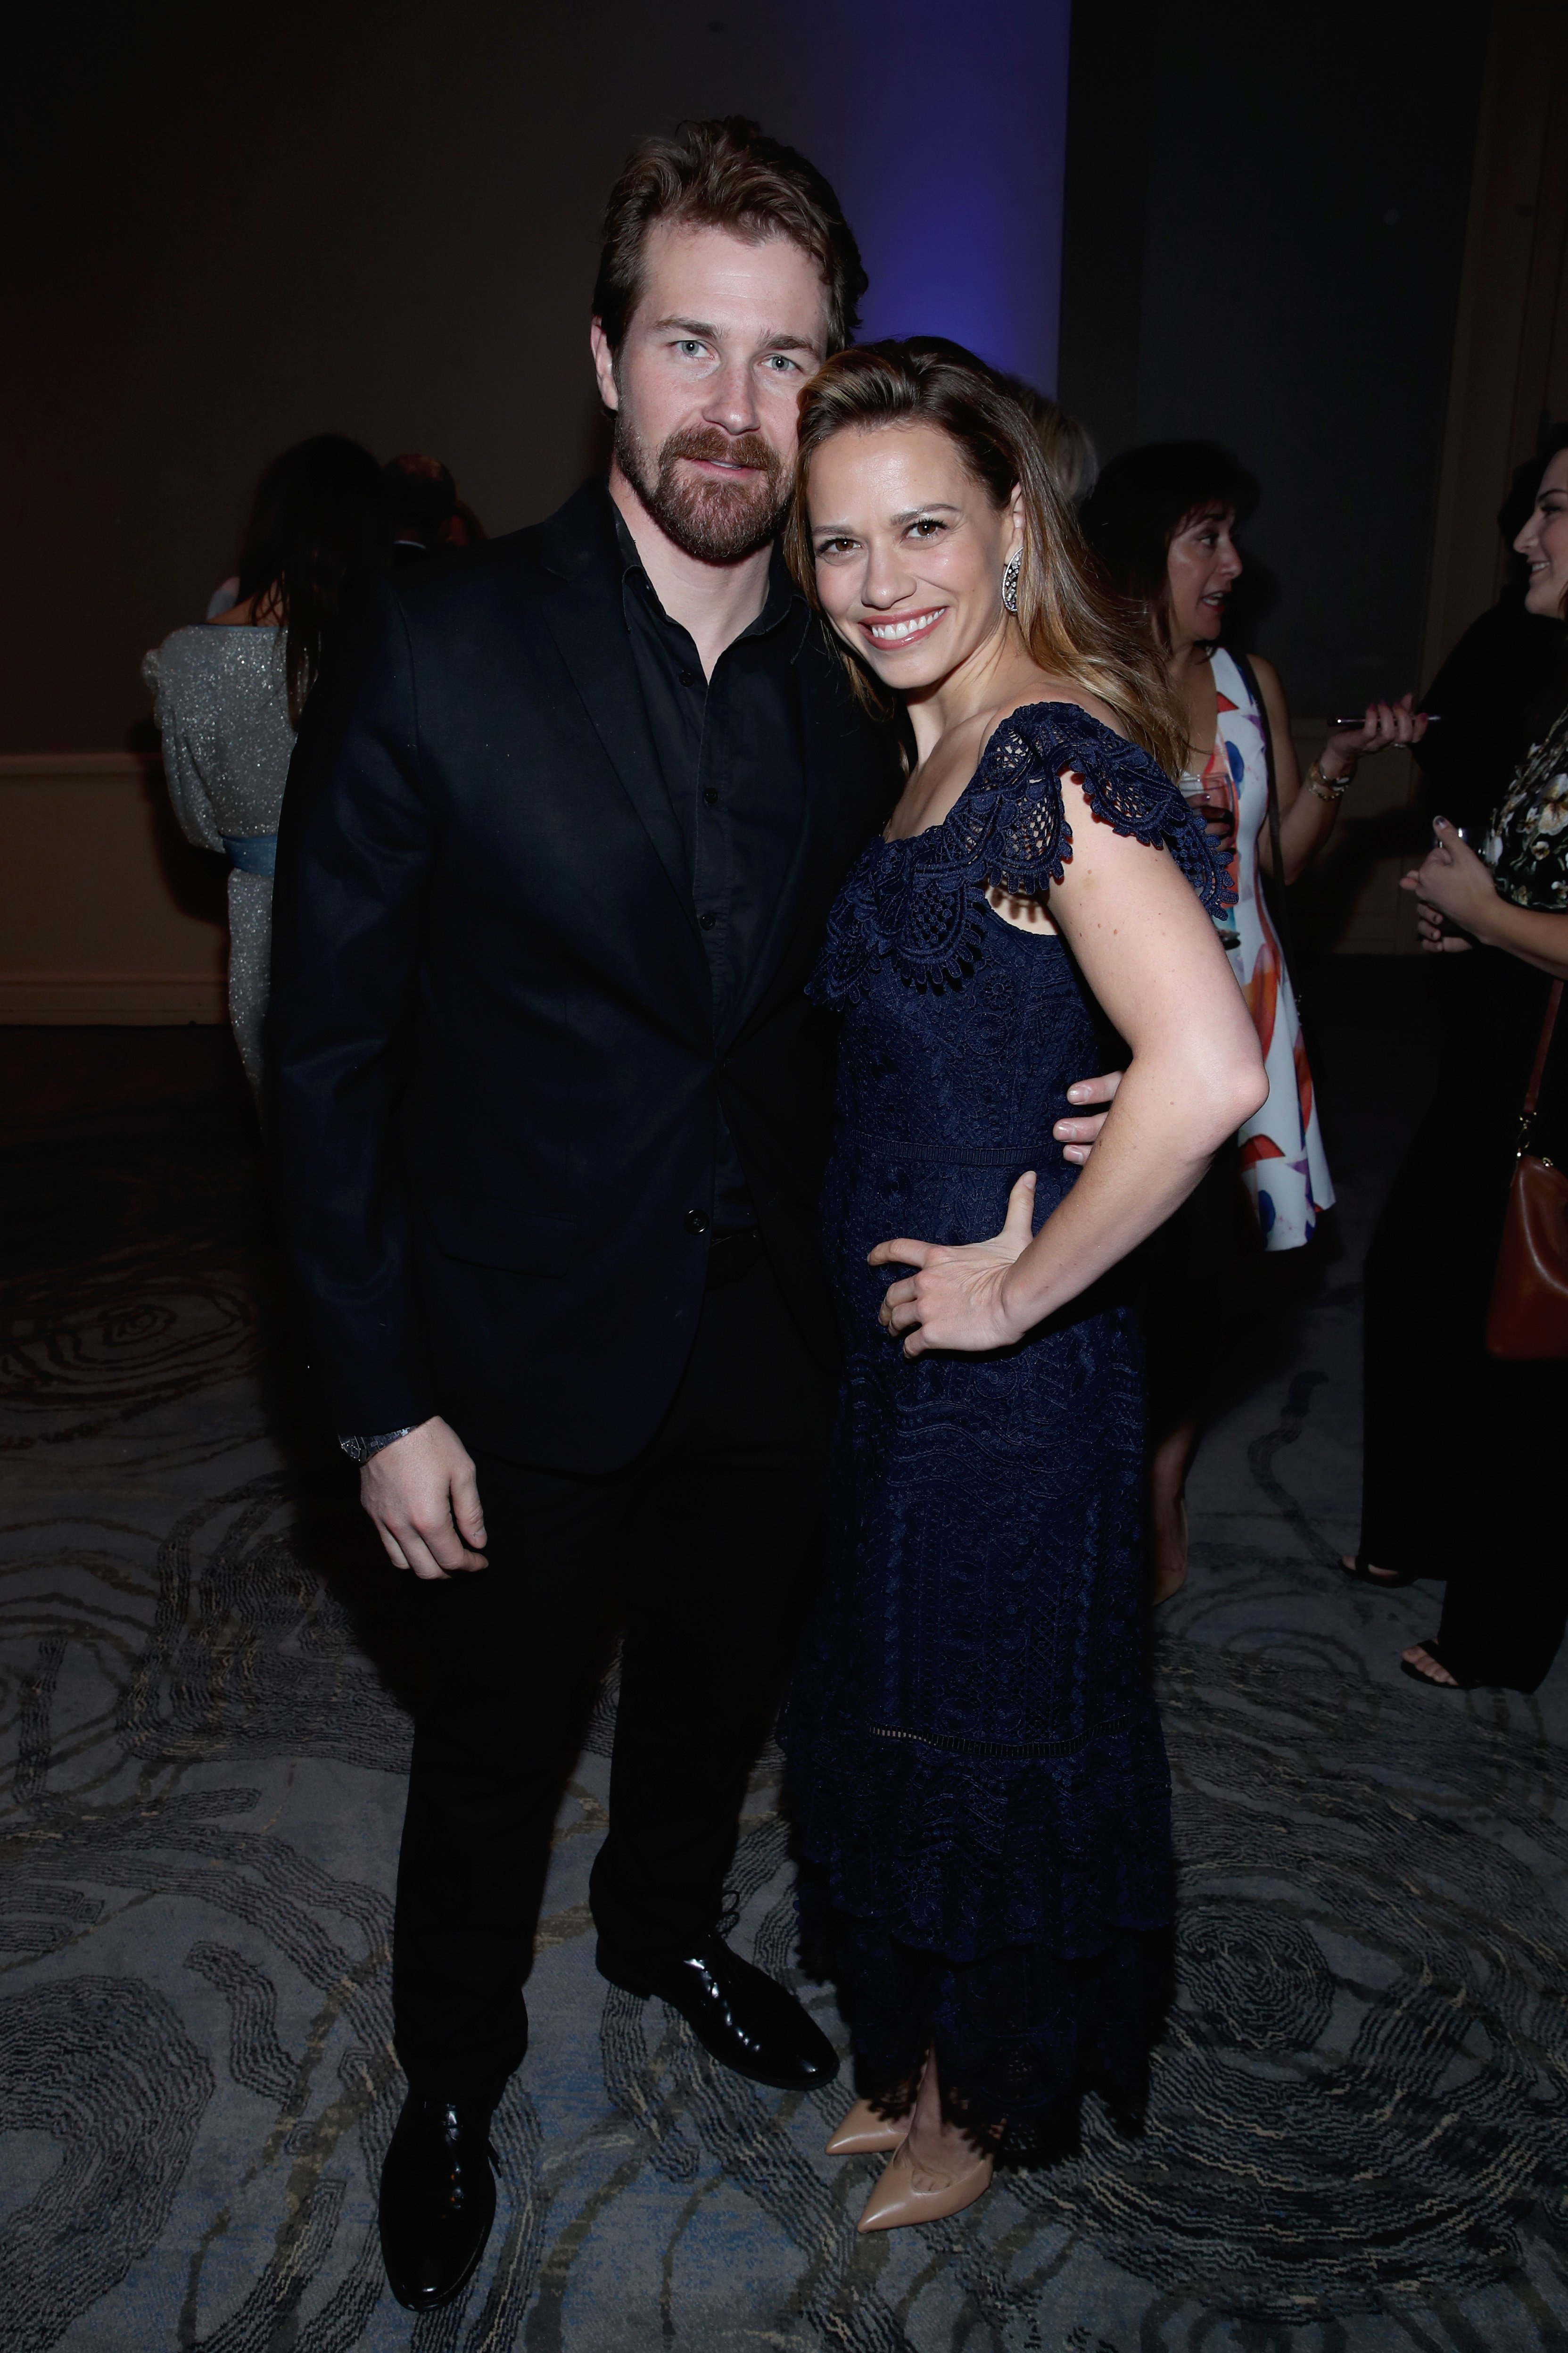 Josh Kelly and Bethany Joy Lenz attend Equality Now's Make Equality Reality Gala 2018 at The Beverly Hilton Hotel on December 3, 2018, in Beverly Hills, California. | Source: Getty Images